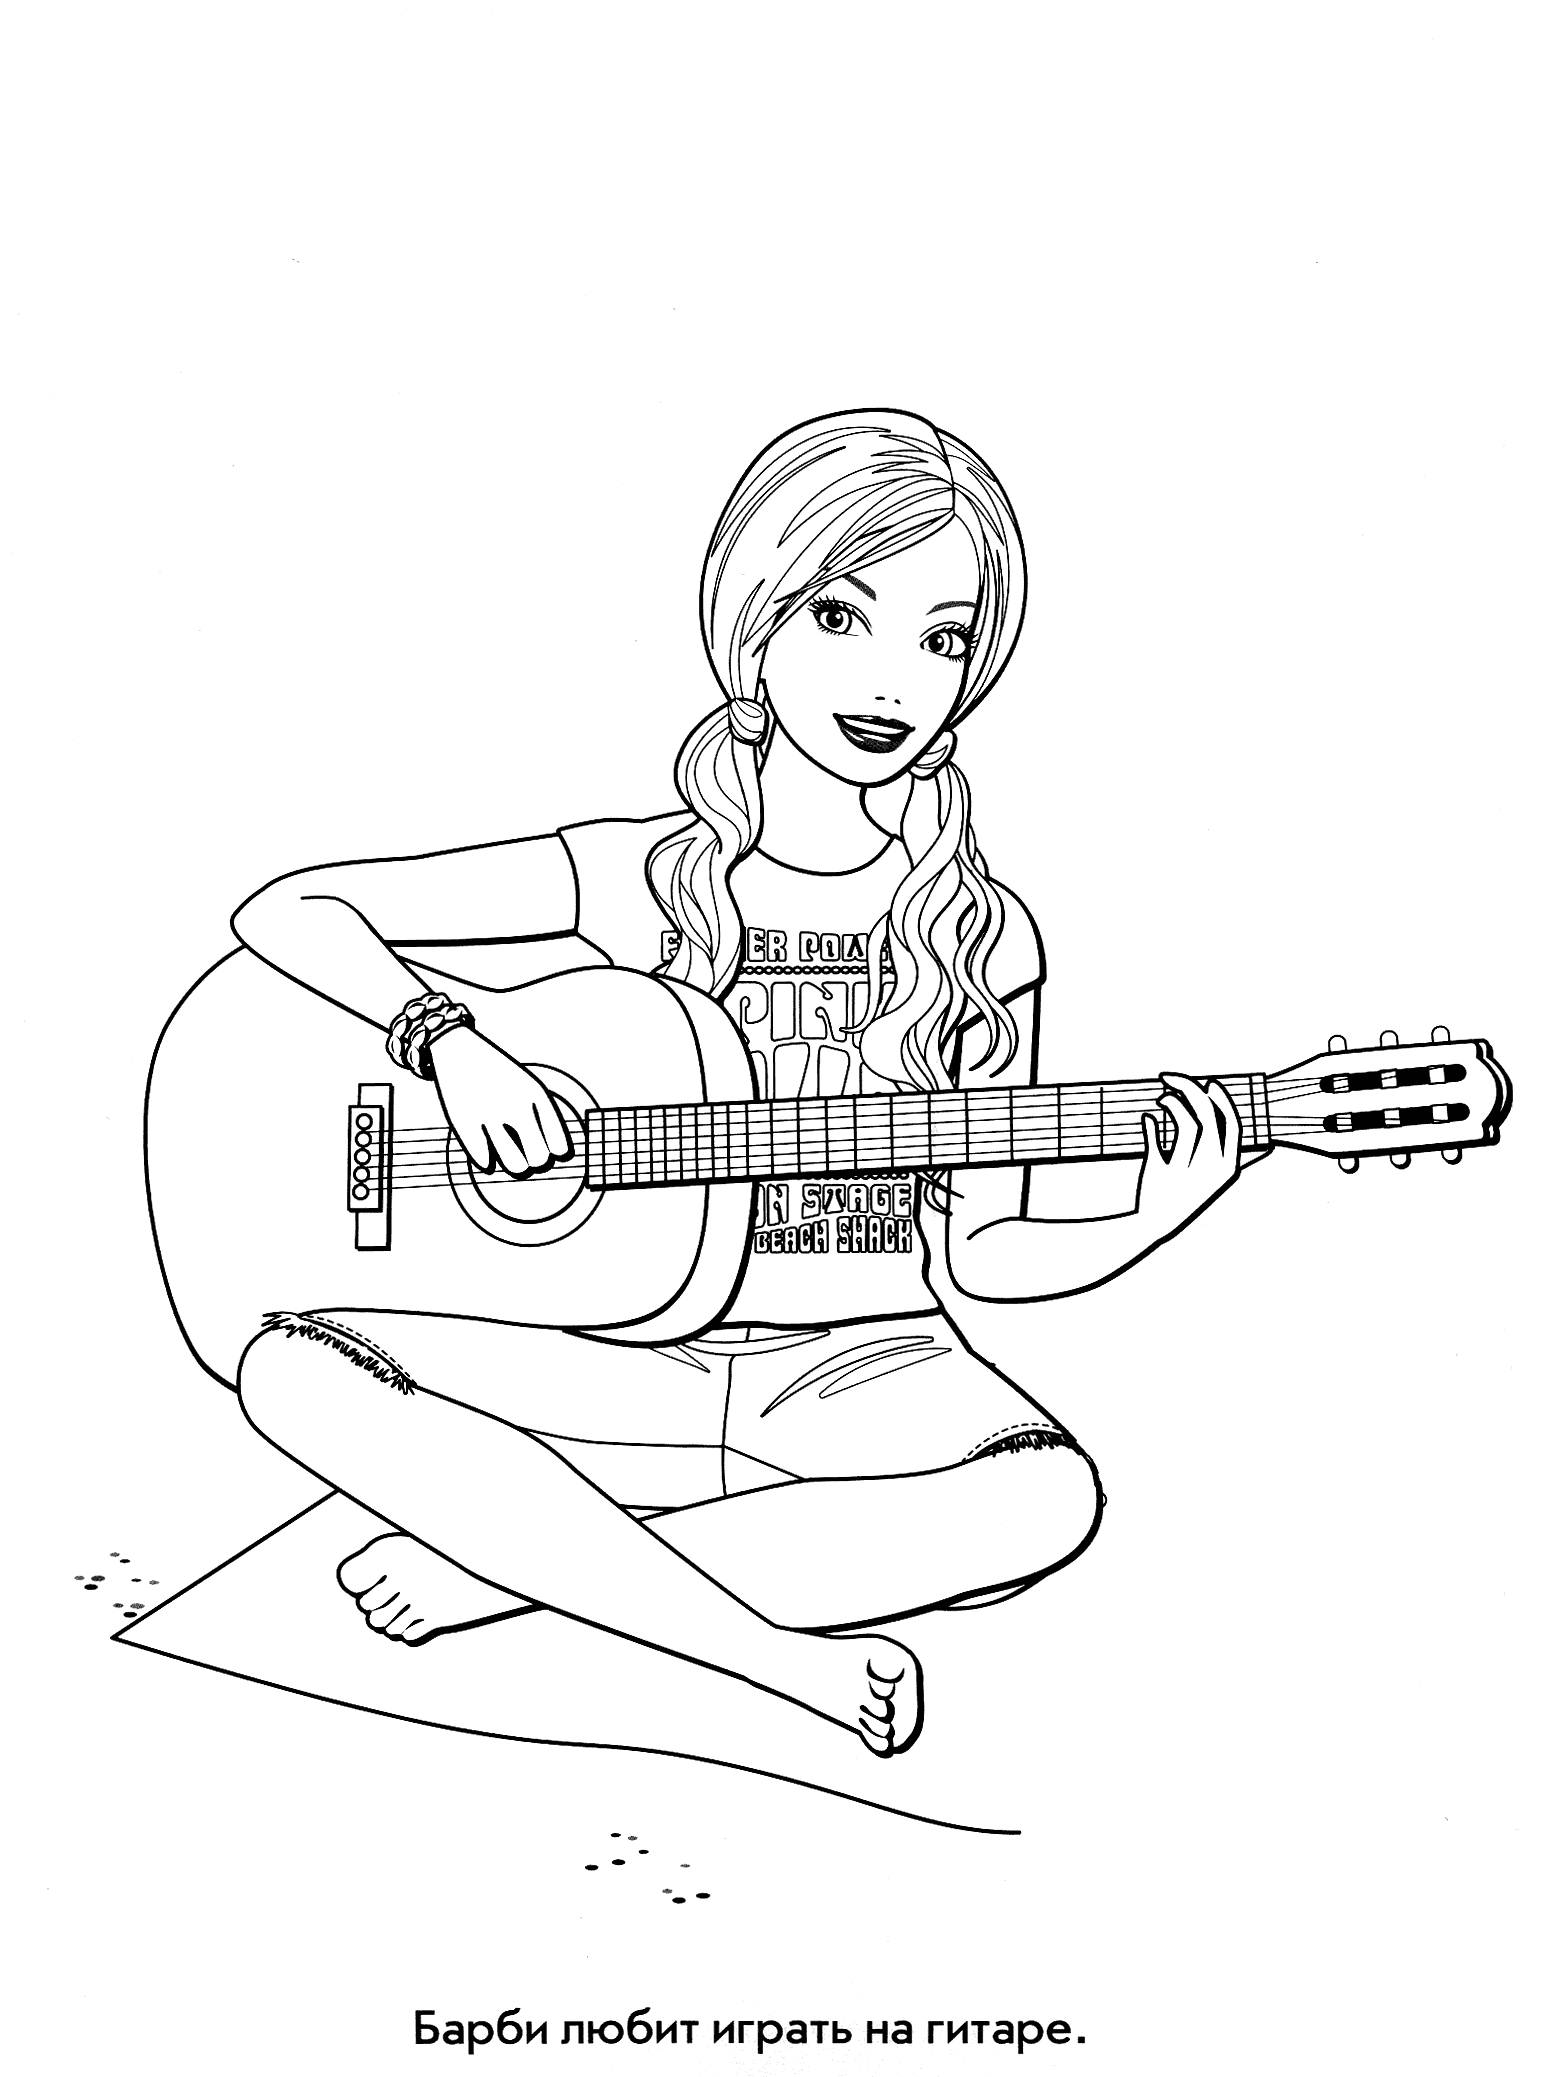 Barbie with guitar